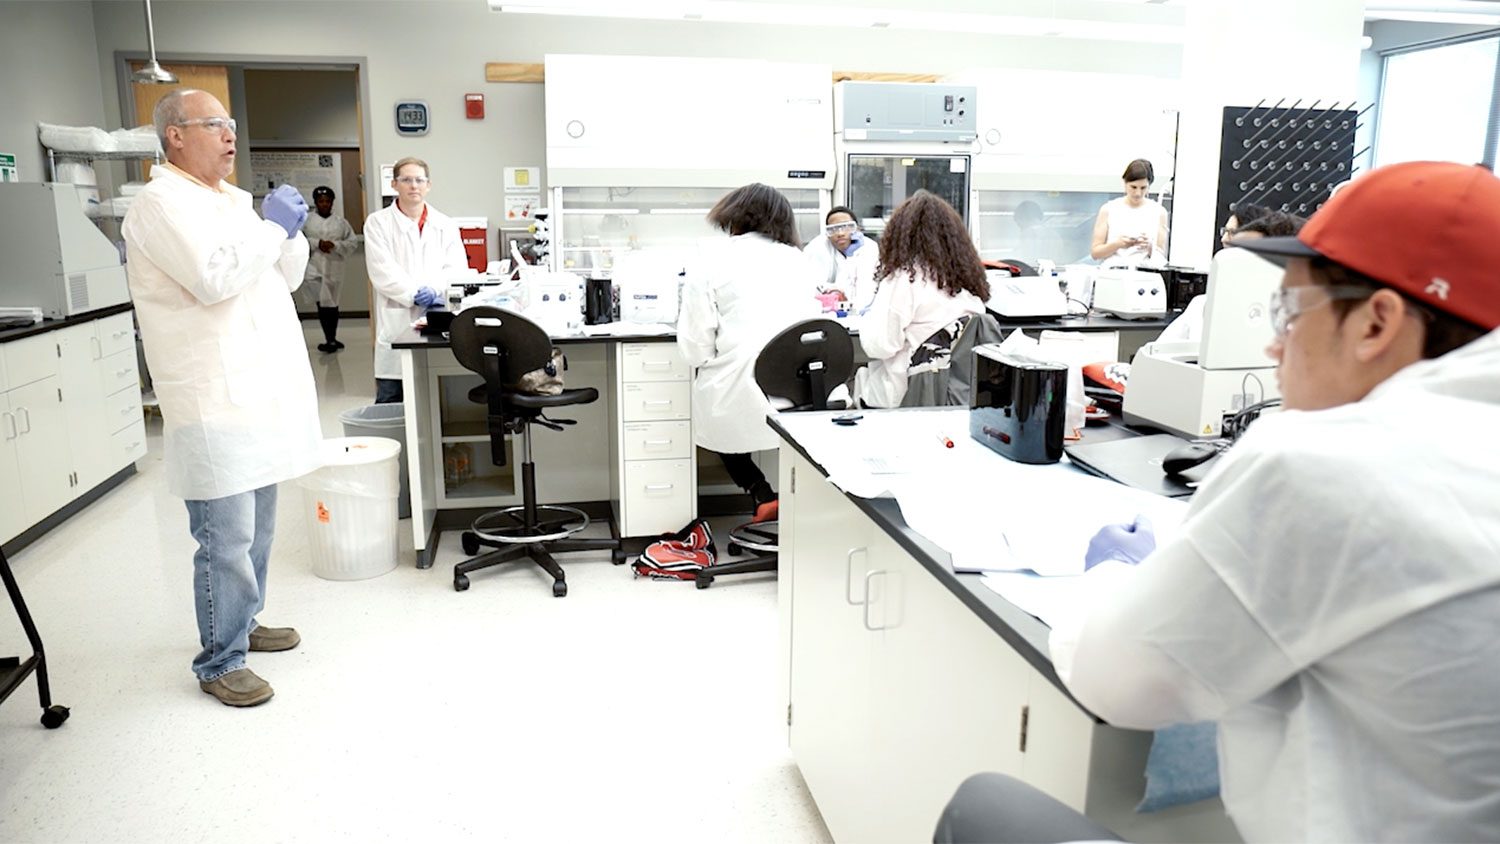 Students in a lab listening to an instructor